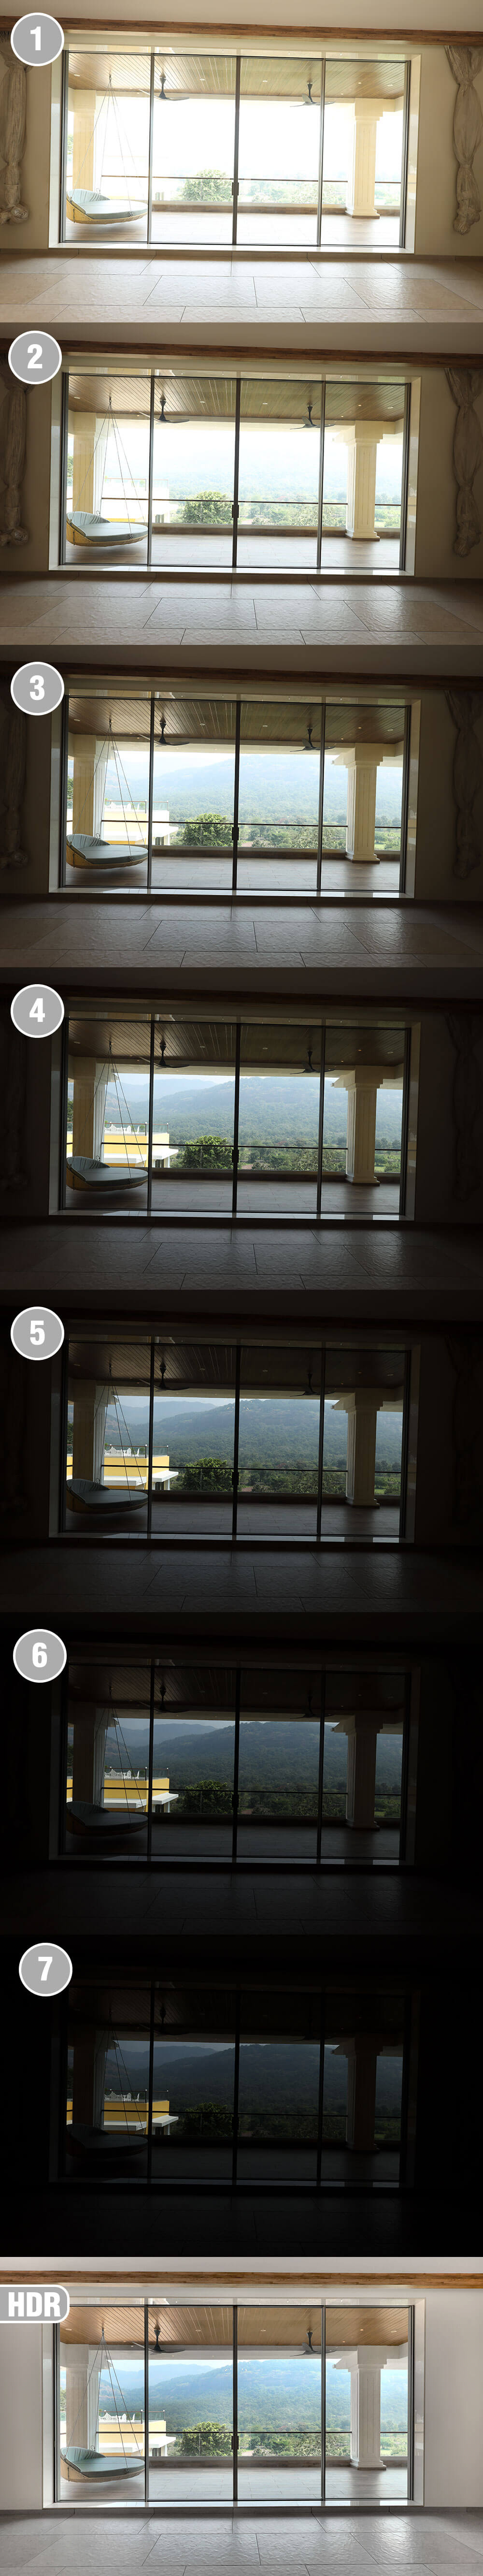 Sequence of photographs for HDR